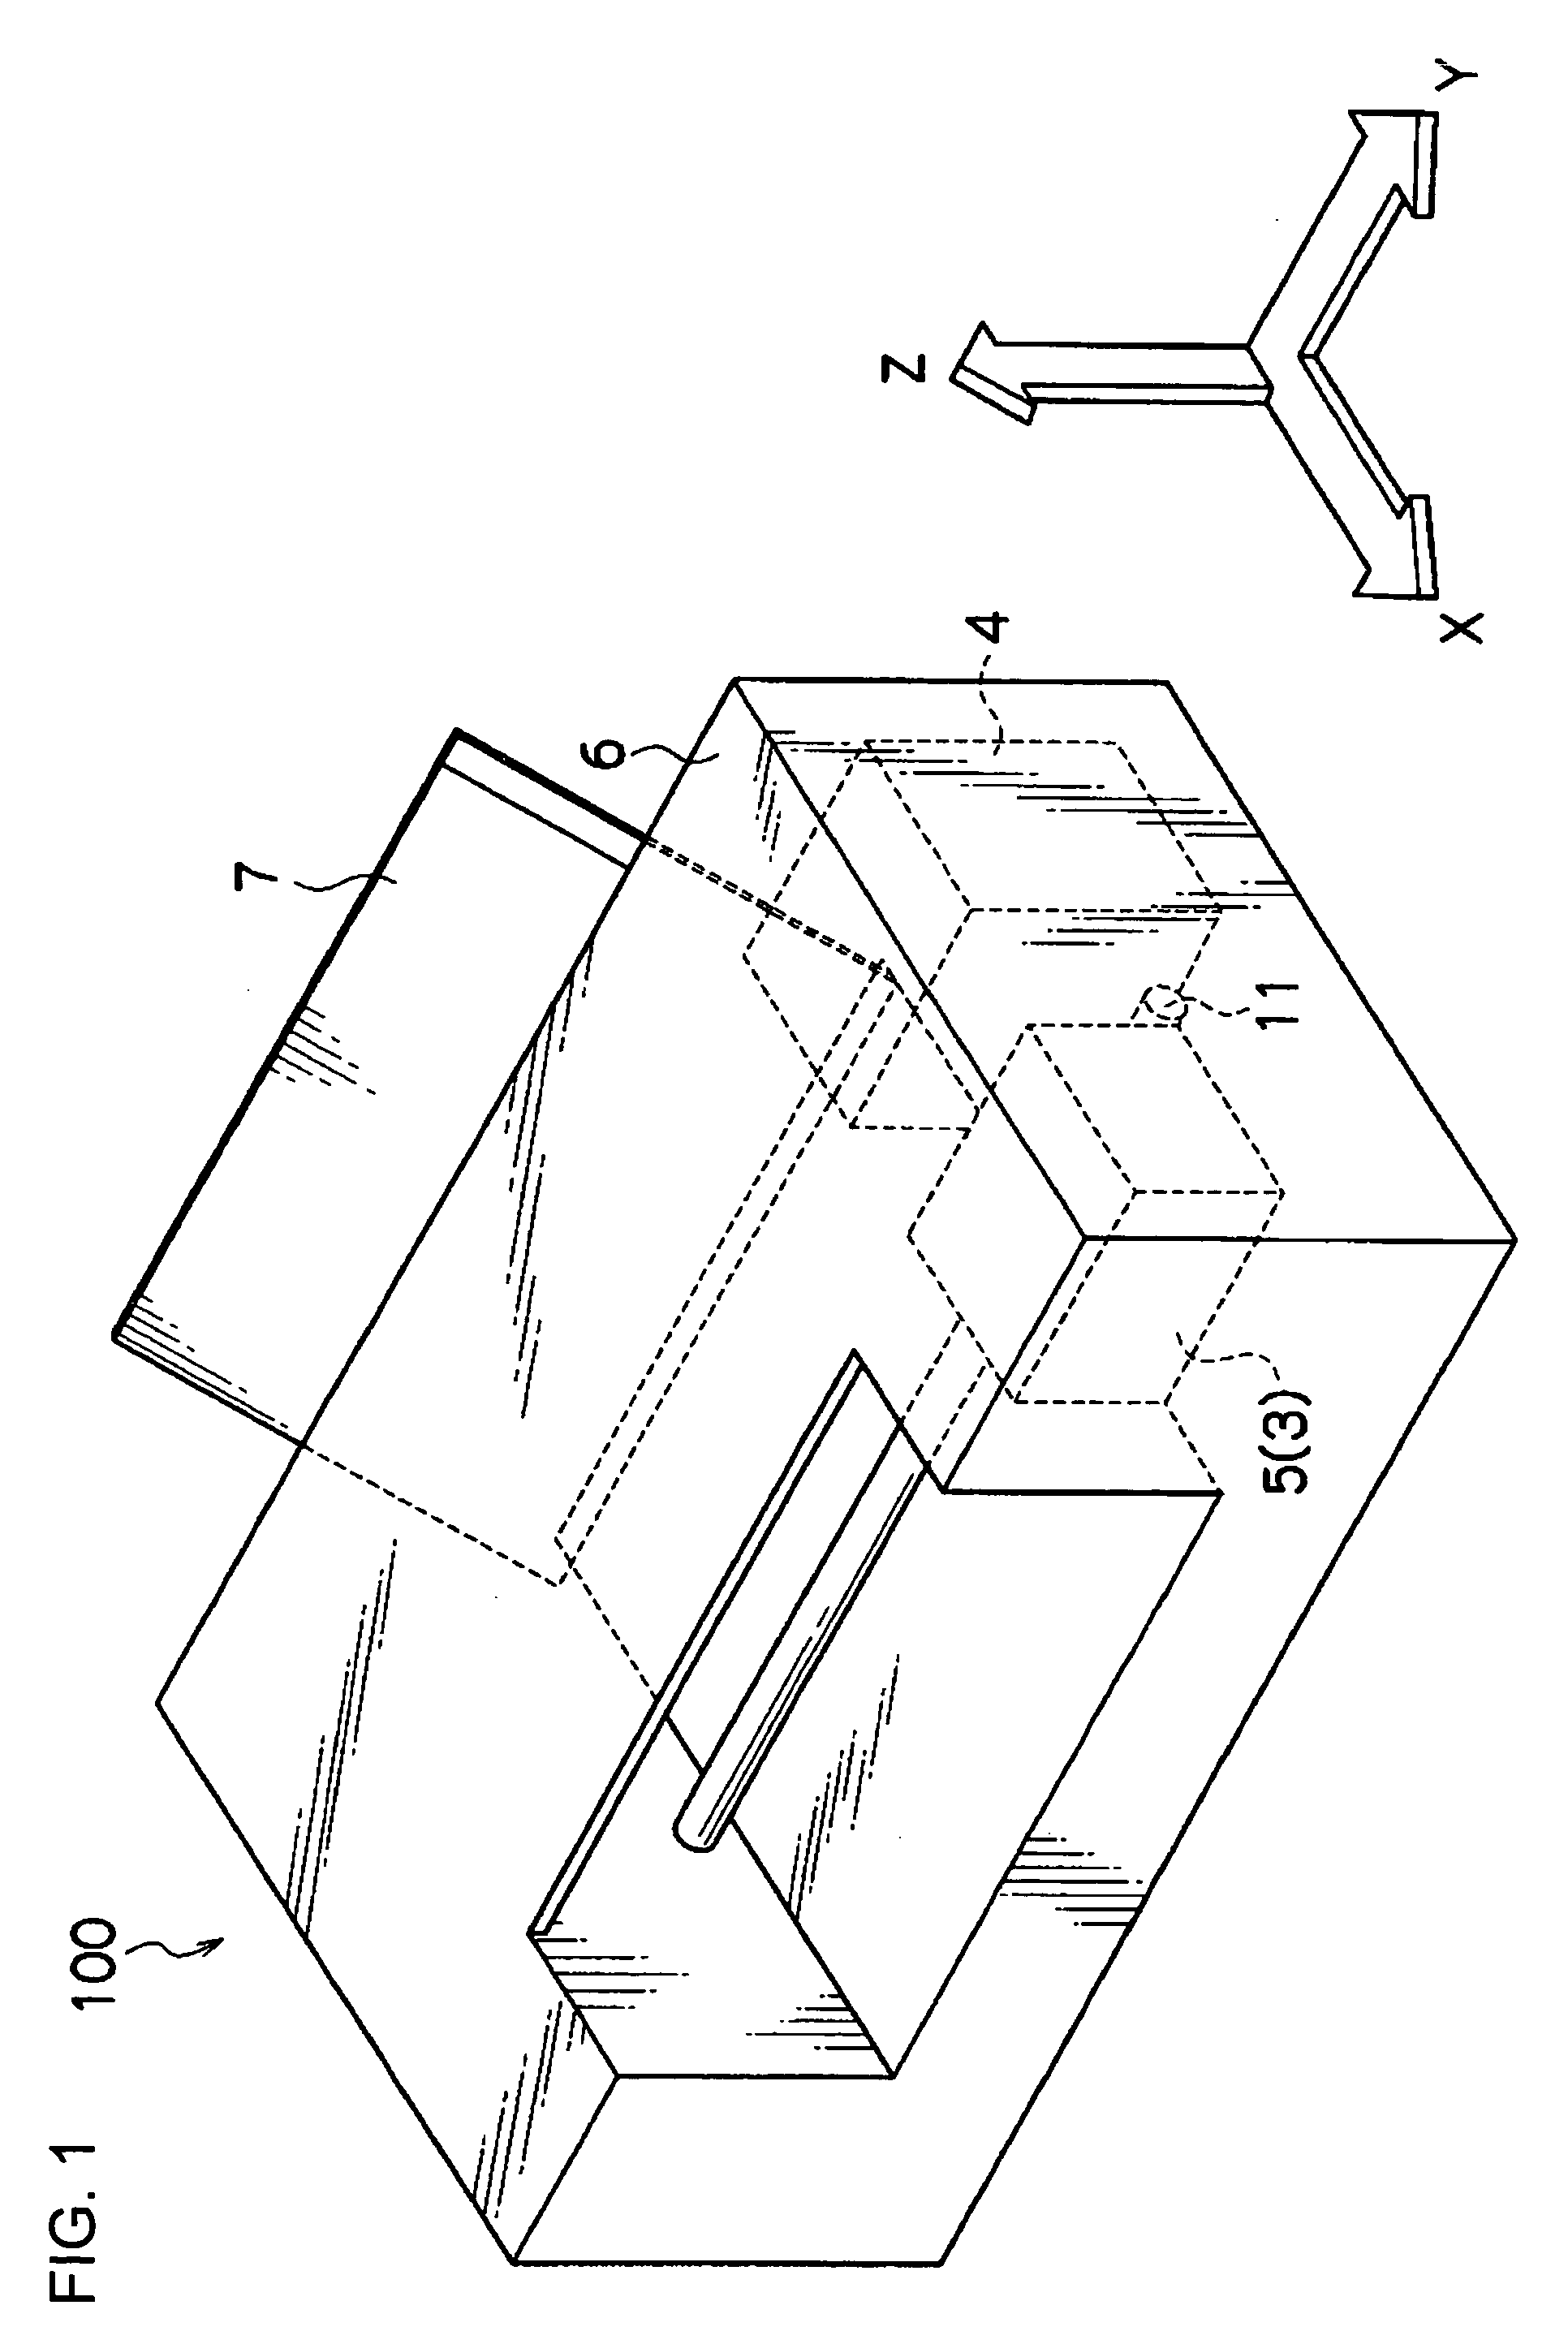 Cap and droplet ejecting apparatus